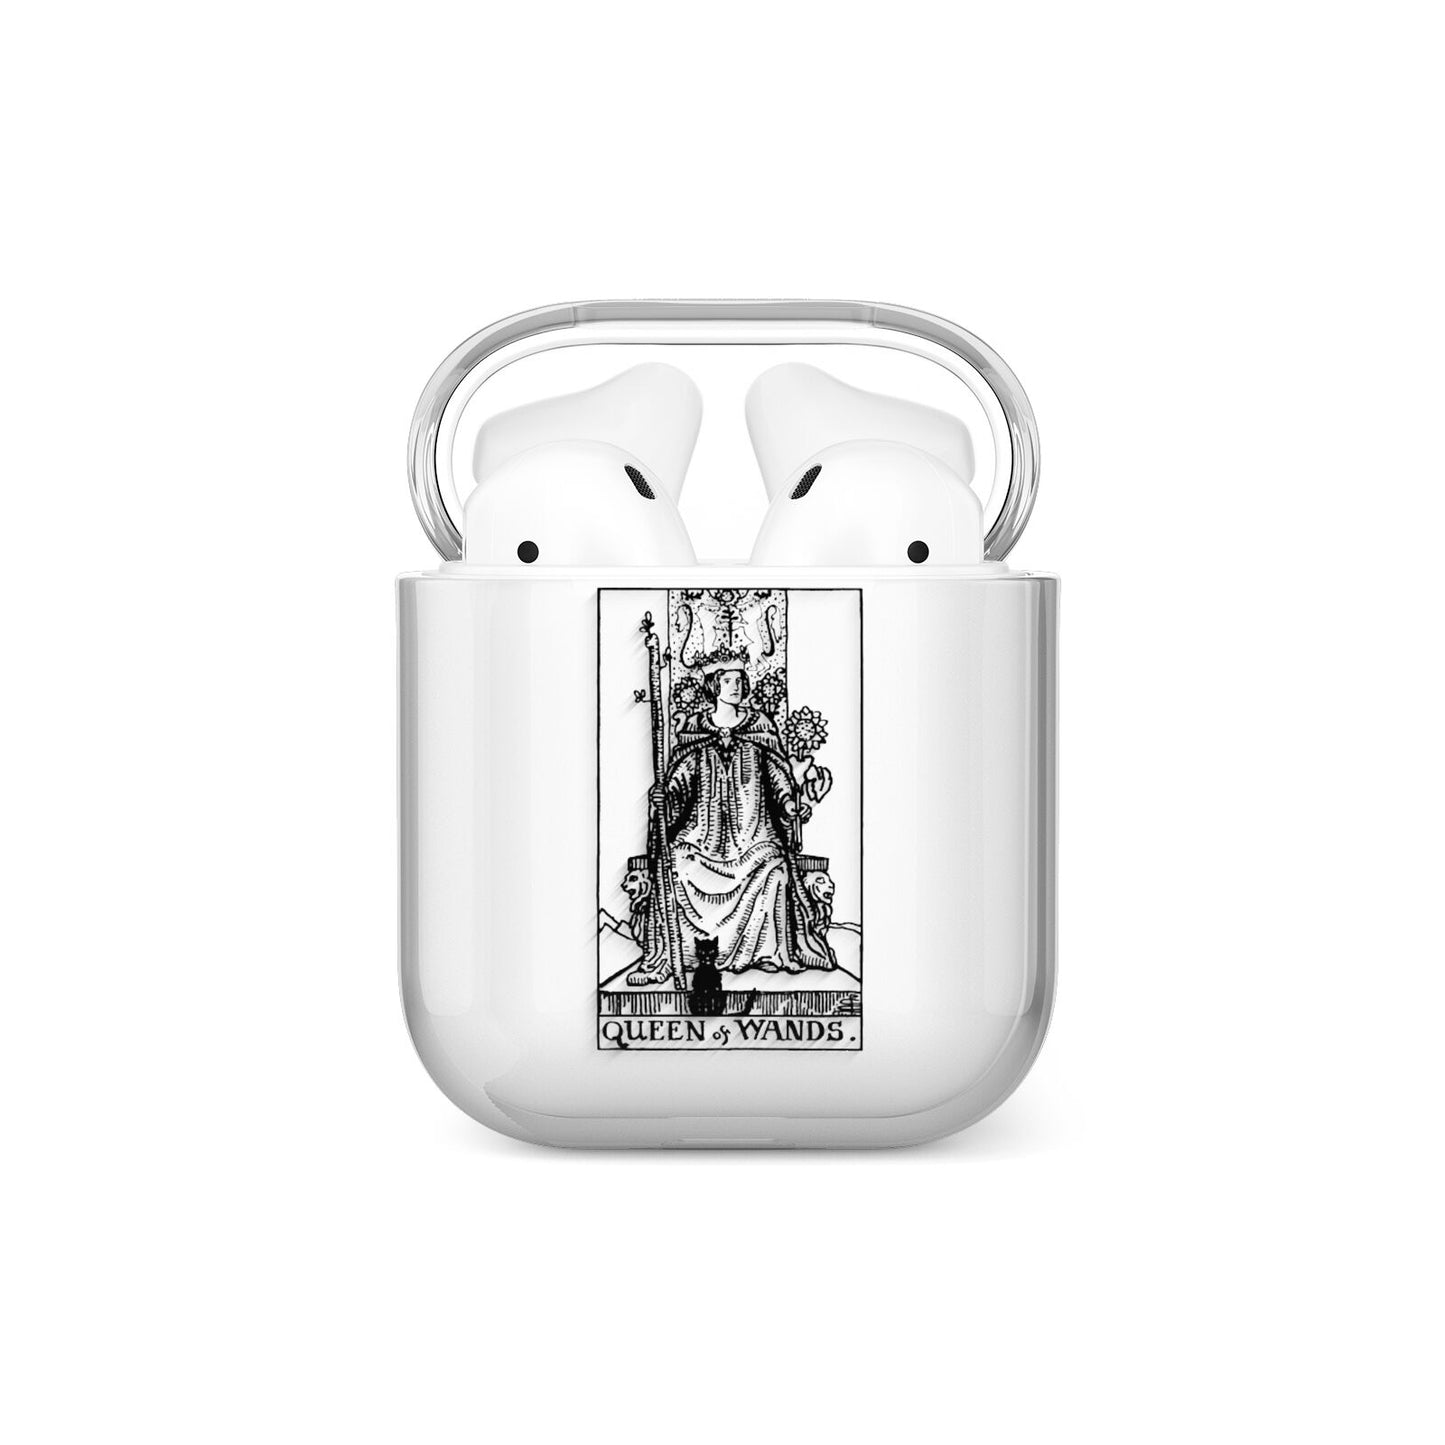 Queen of Wands Monochrome AirPods Case